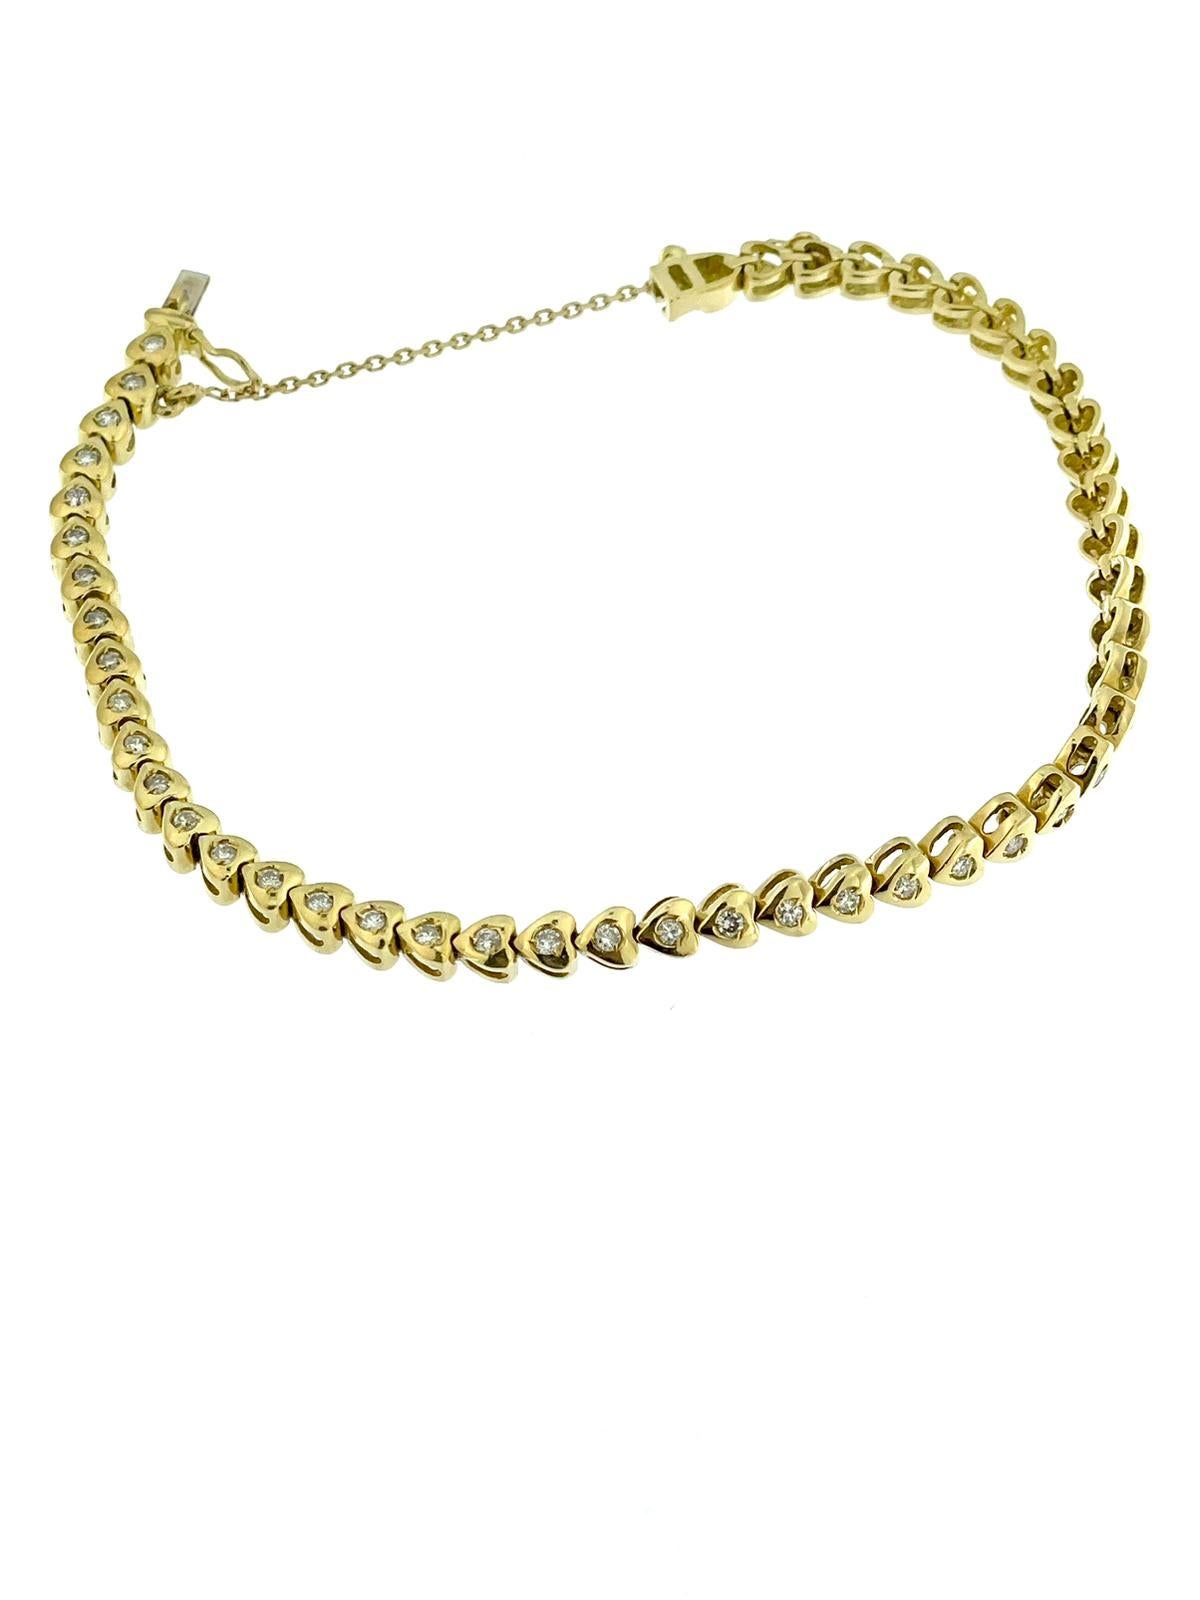 Modern Tennis Bracelet 47 Hearts Yellow Gold and Diamonds  For Sale